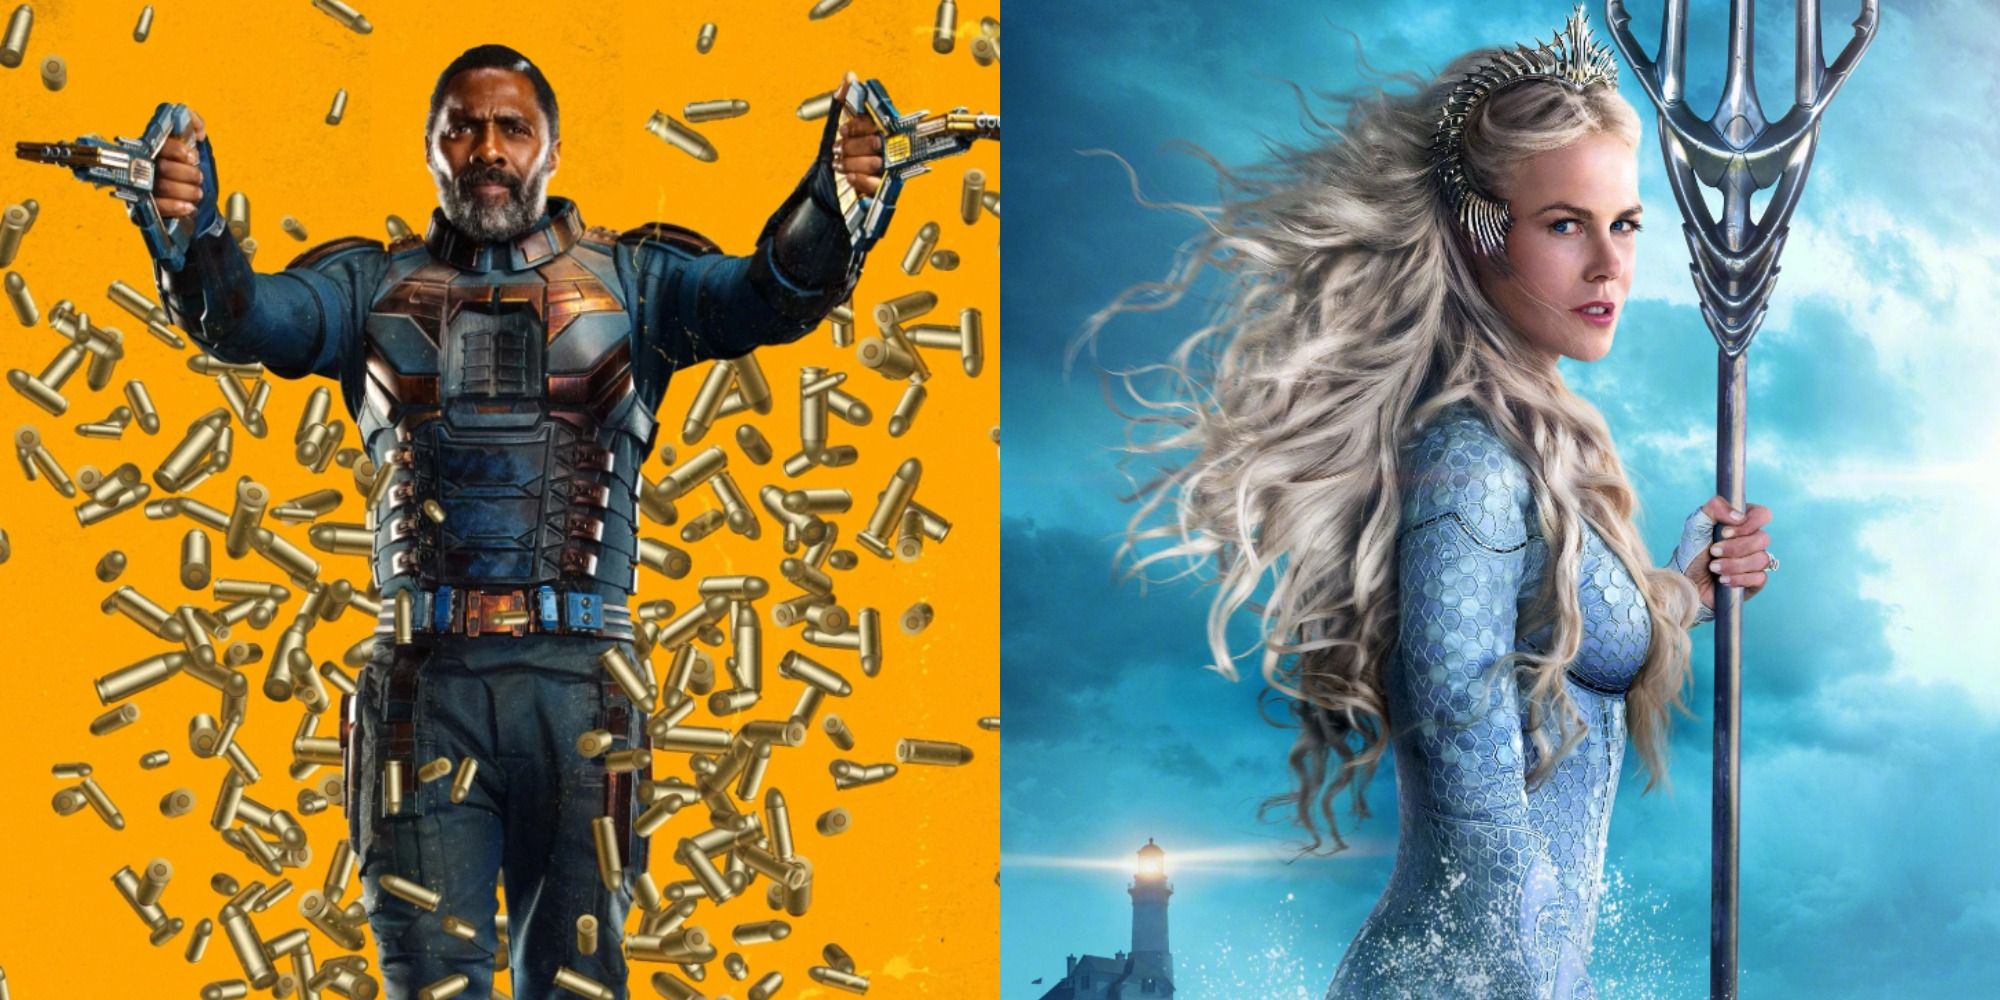 Split image showing posters for Bloodsport in TSS and Atlanna in Aquaman